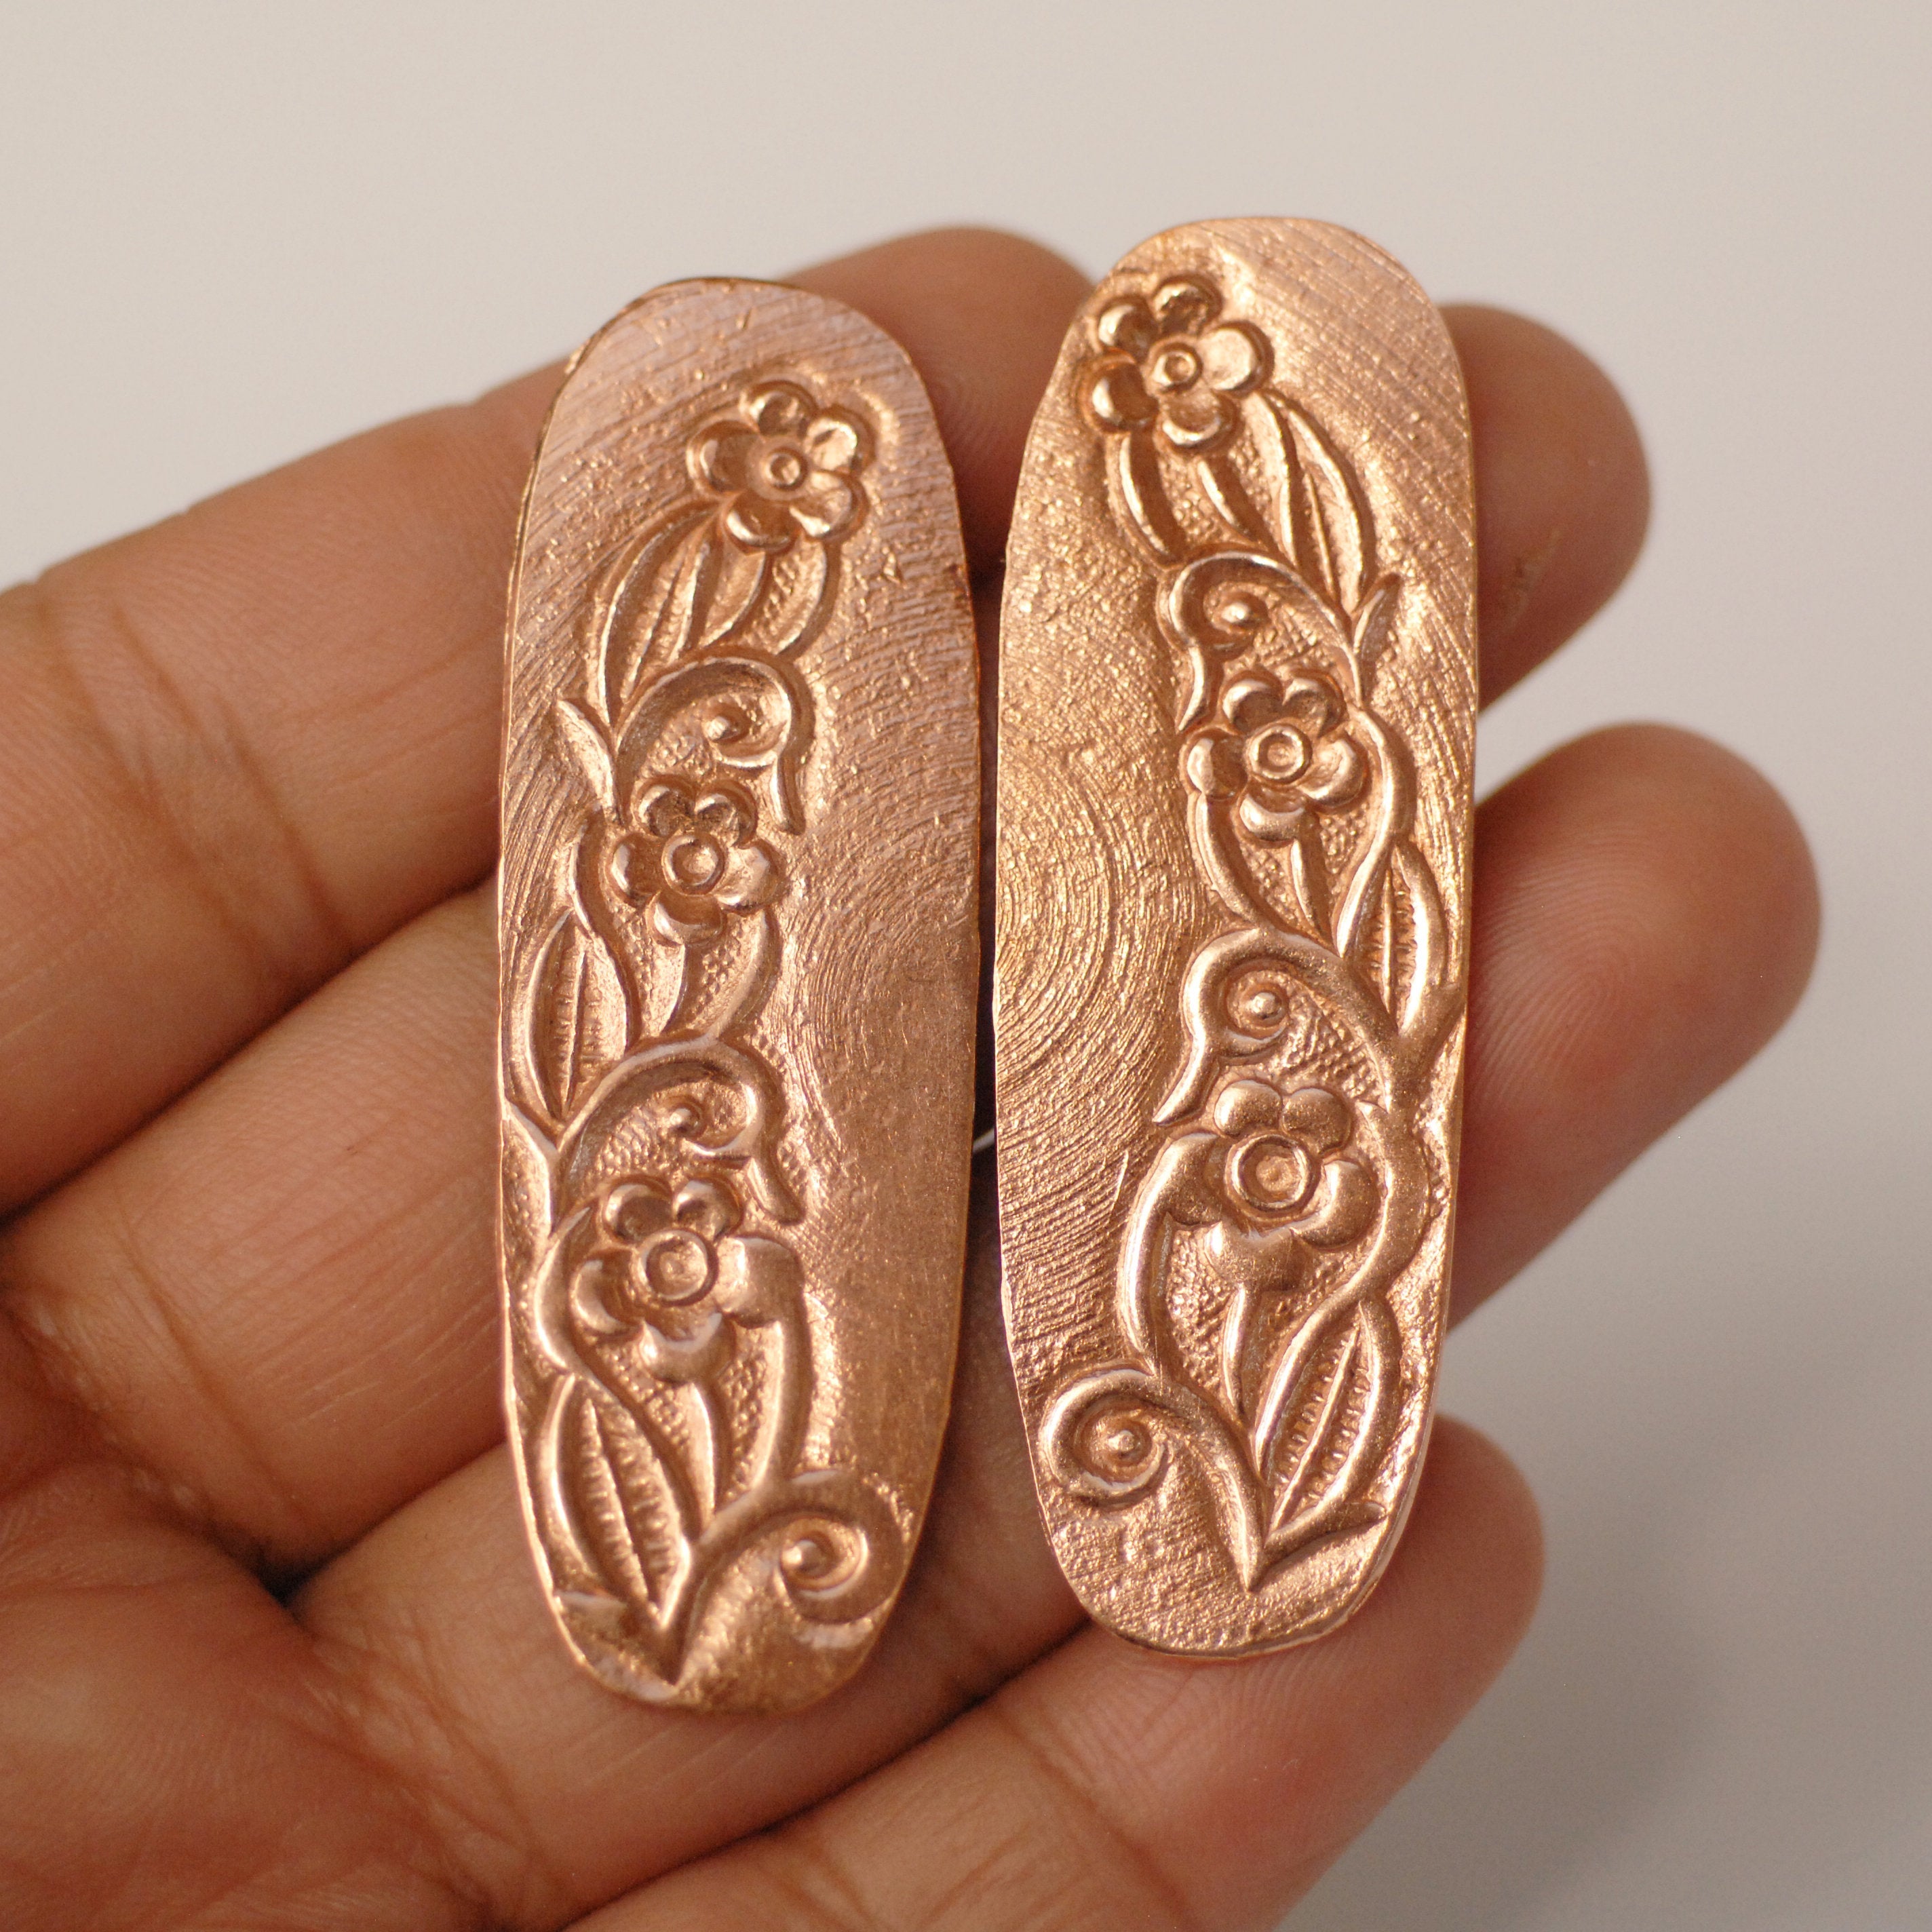 Oval shapes w/ floral texture metal blanks - Solid copper